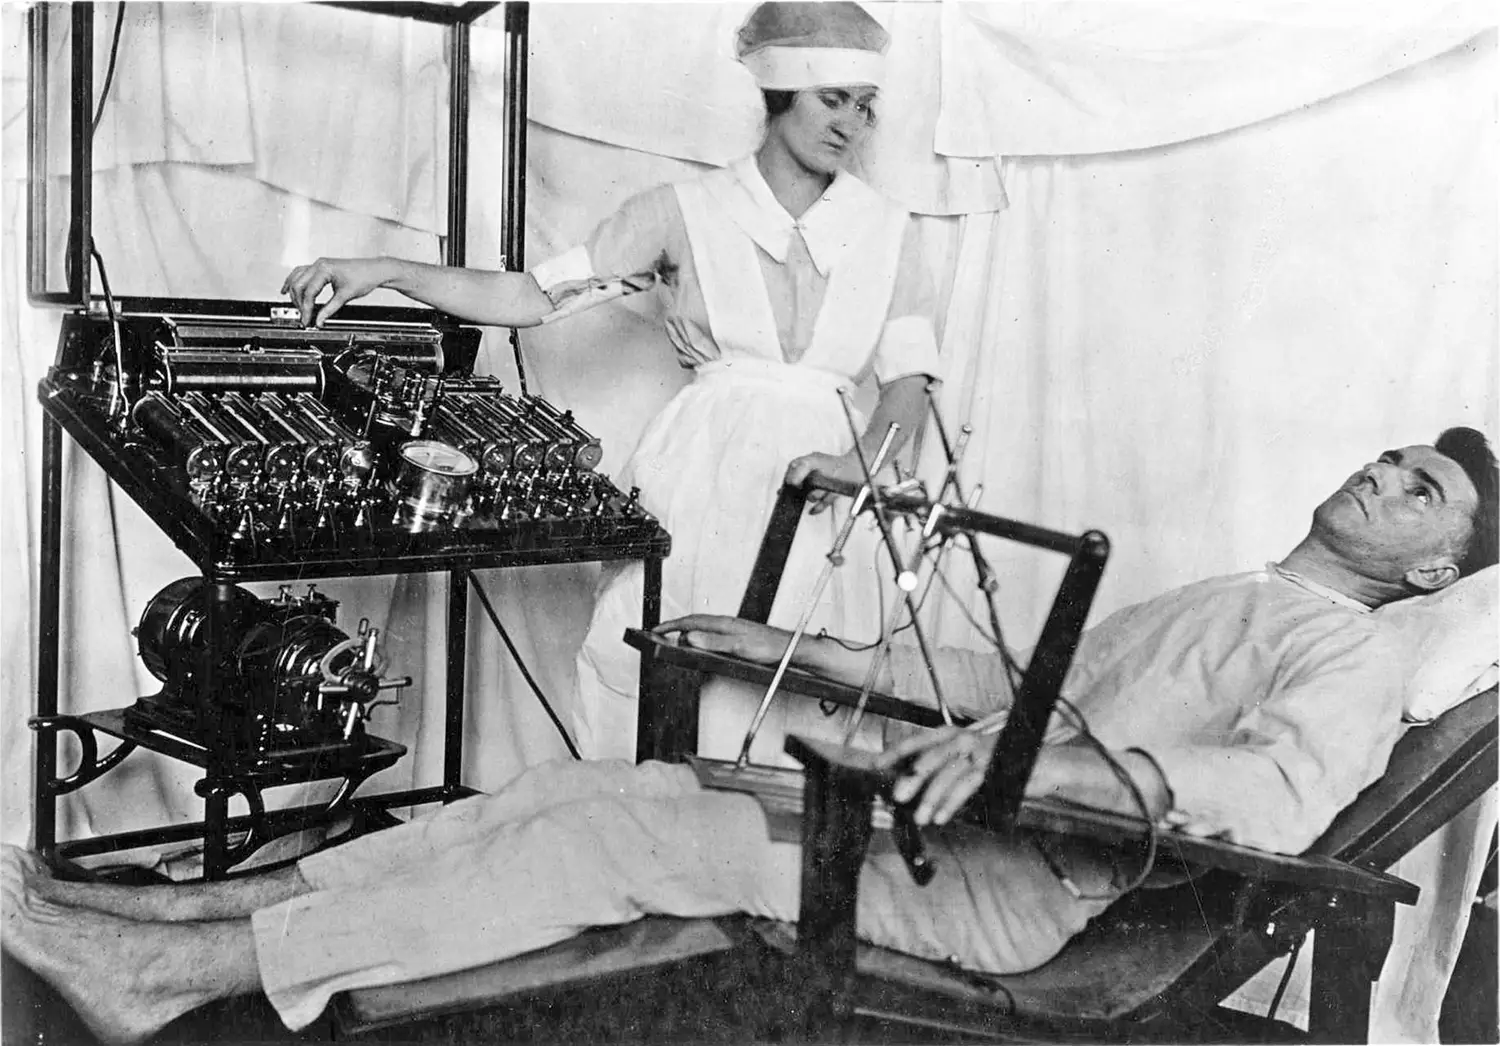 A nurse in a white uniform stands next to a complex mechanical apparatus with multiple tubes, dials, and gauges. She adjusts one of the settings with her hand. Lying on a reclined chair next to her is a male patient, attached to the machine via wires. 